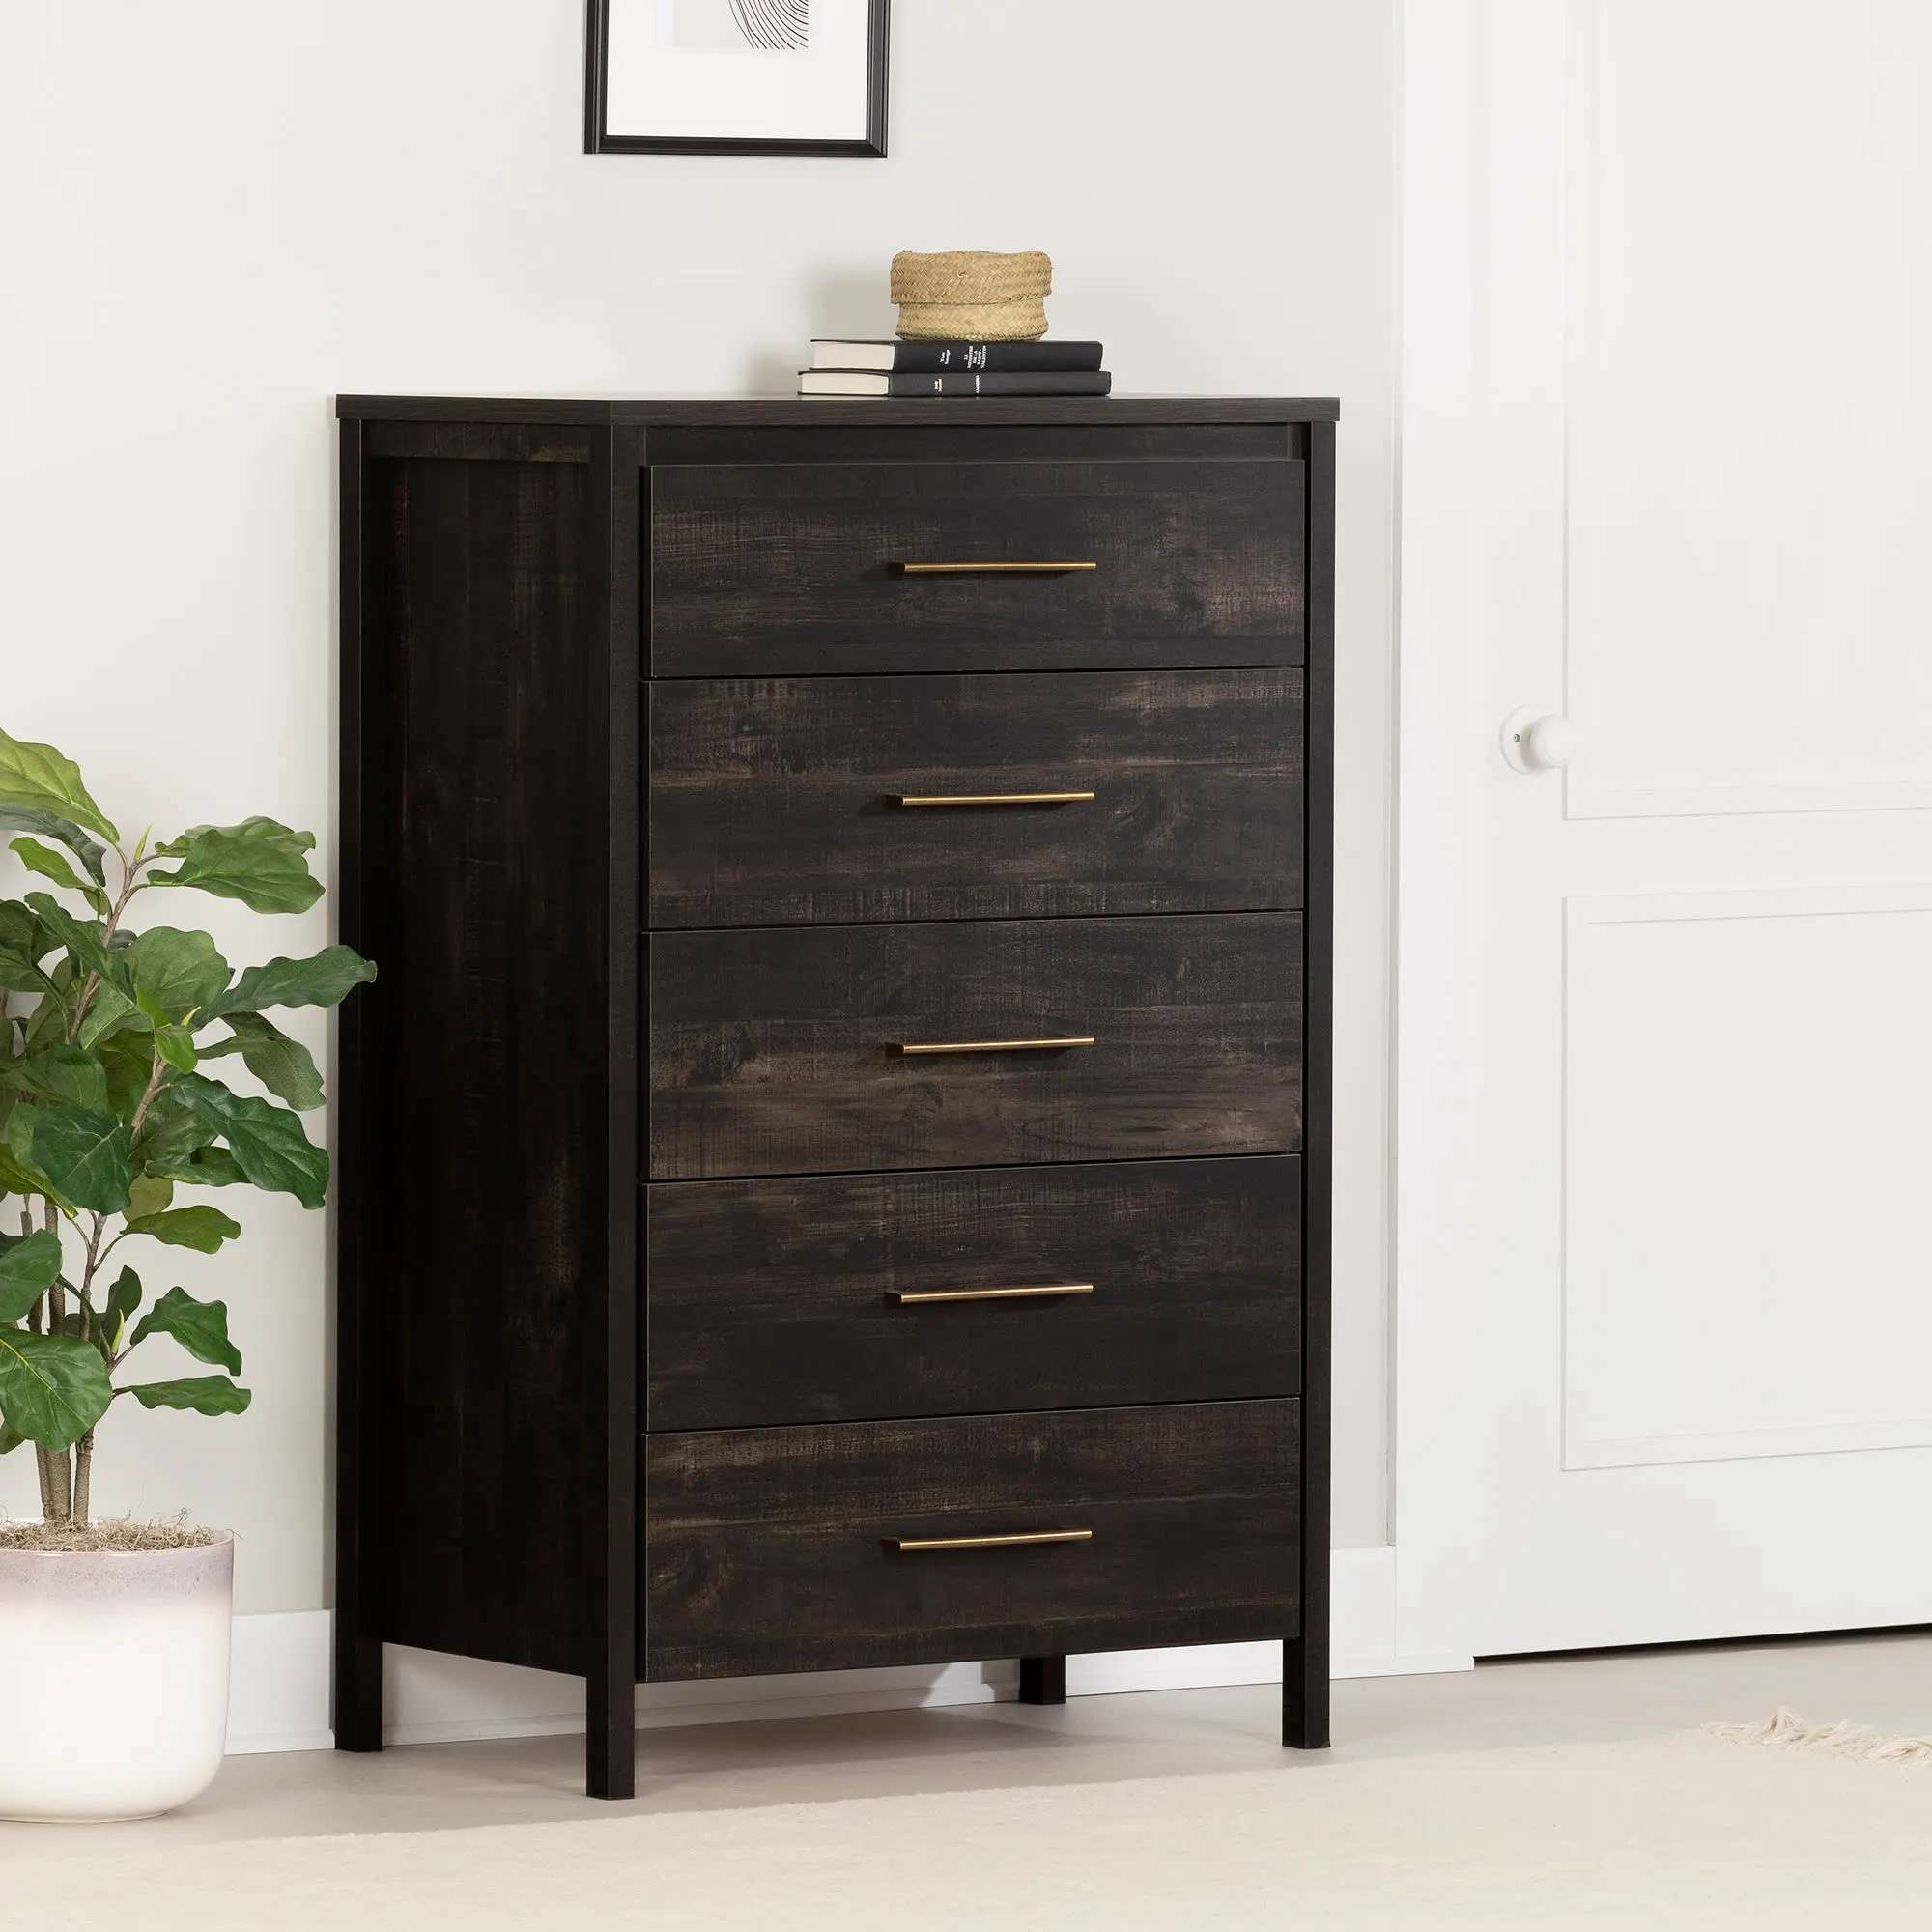 Photos - Dresser / Chests of Drawers South Shore Gravity Rubbed Black 5 Drawer Chest - South Shore 13558